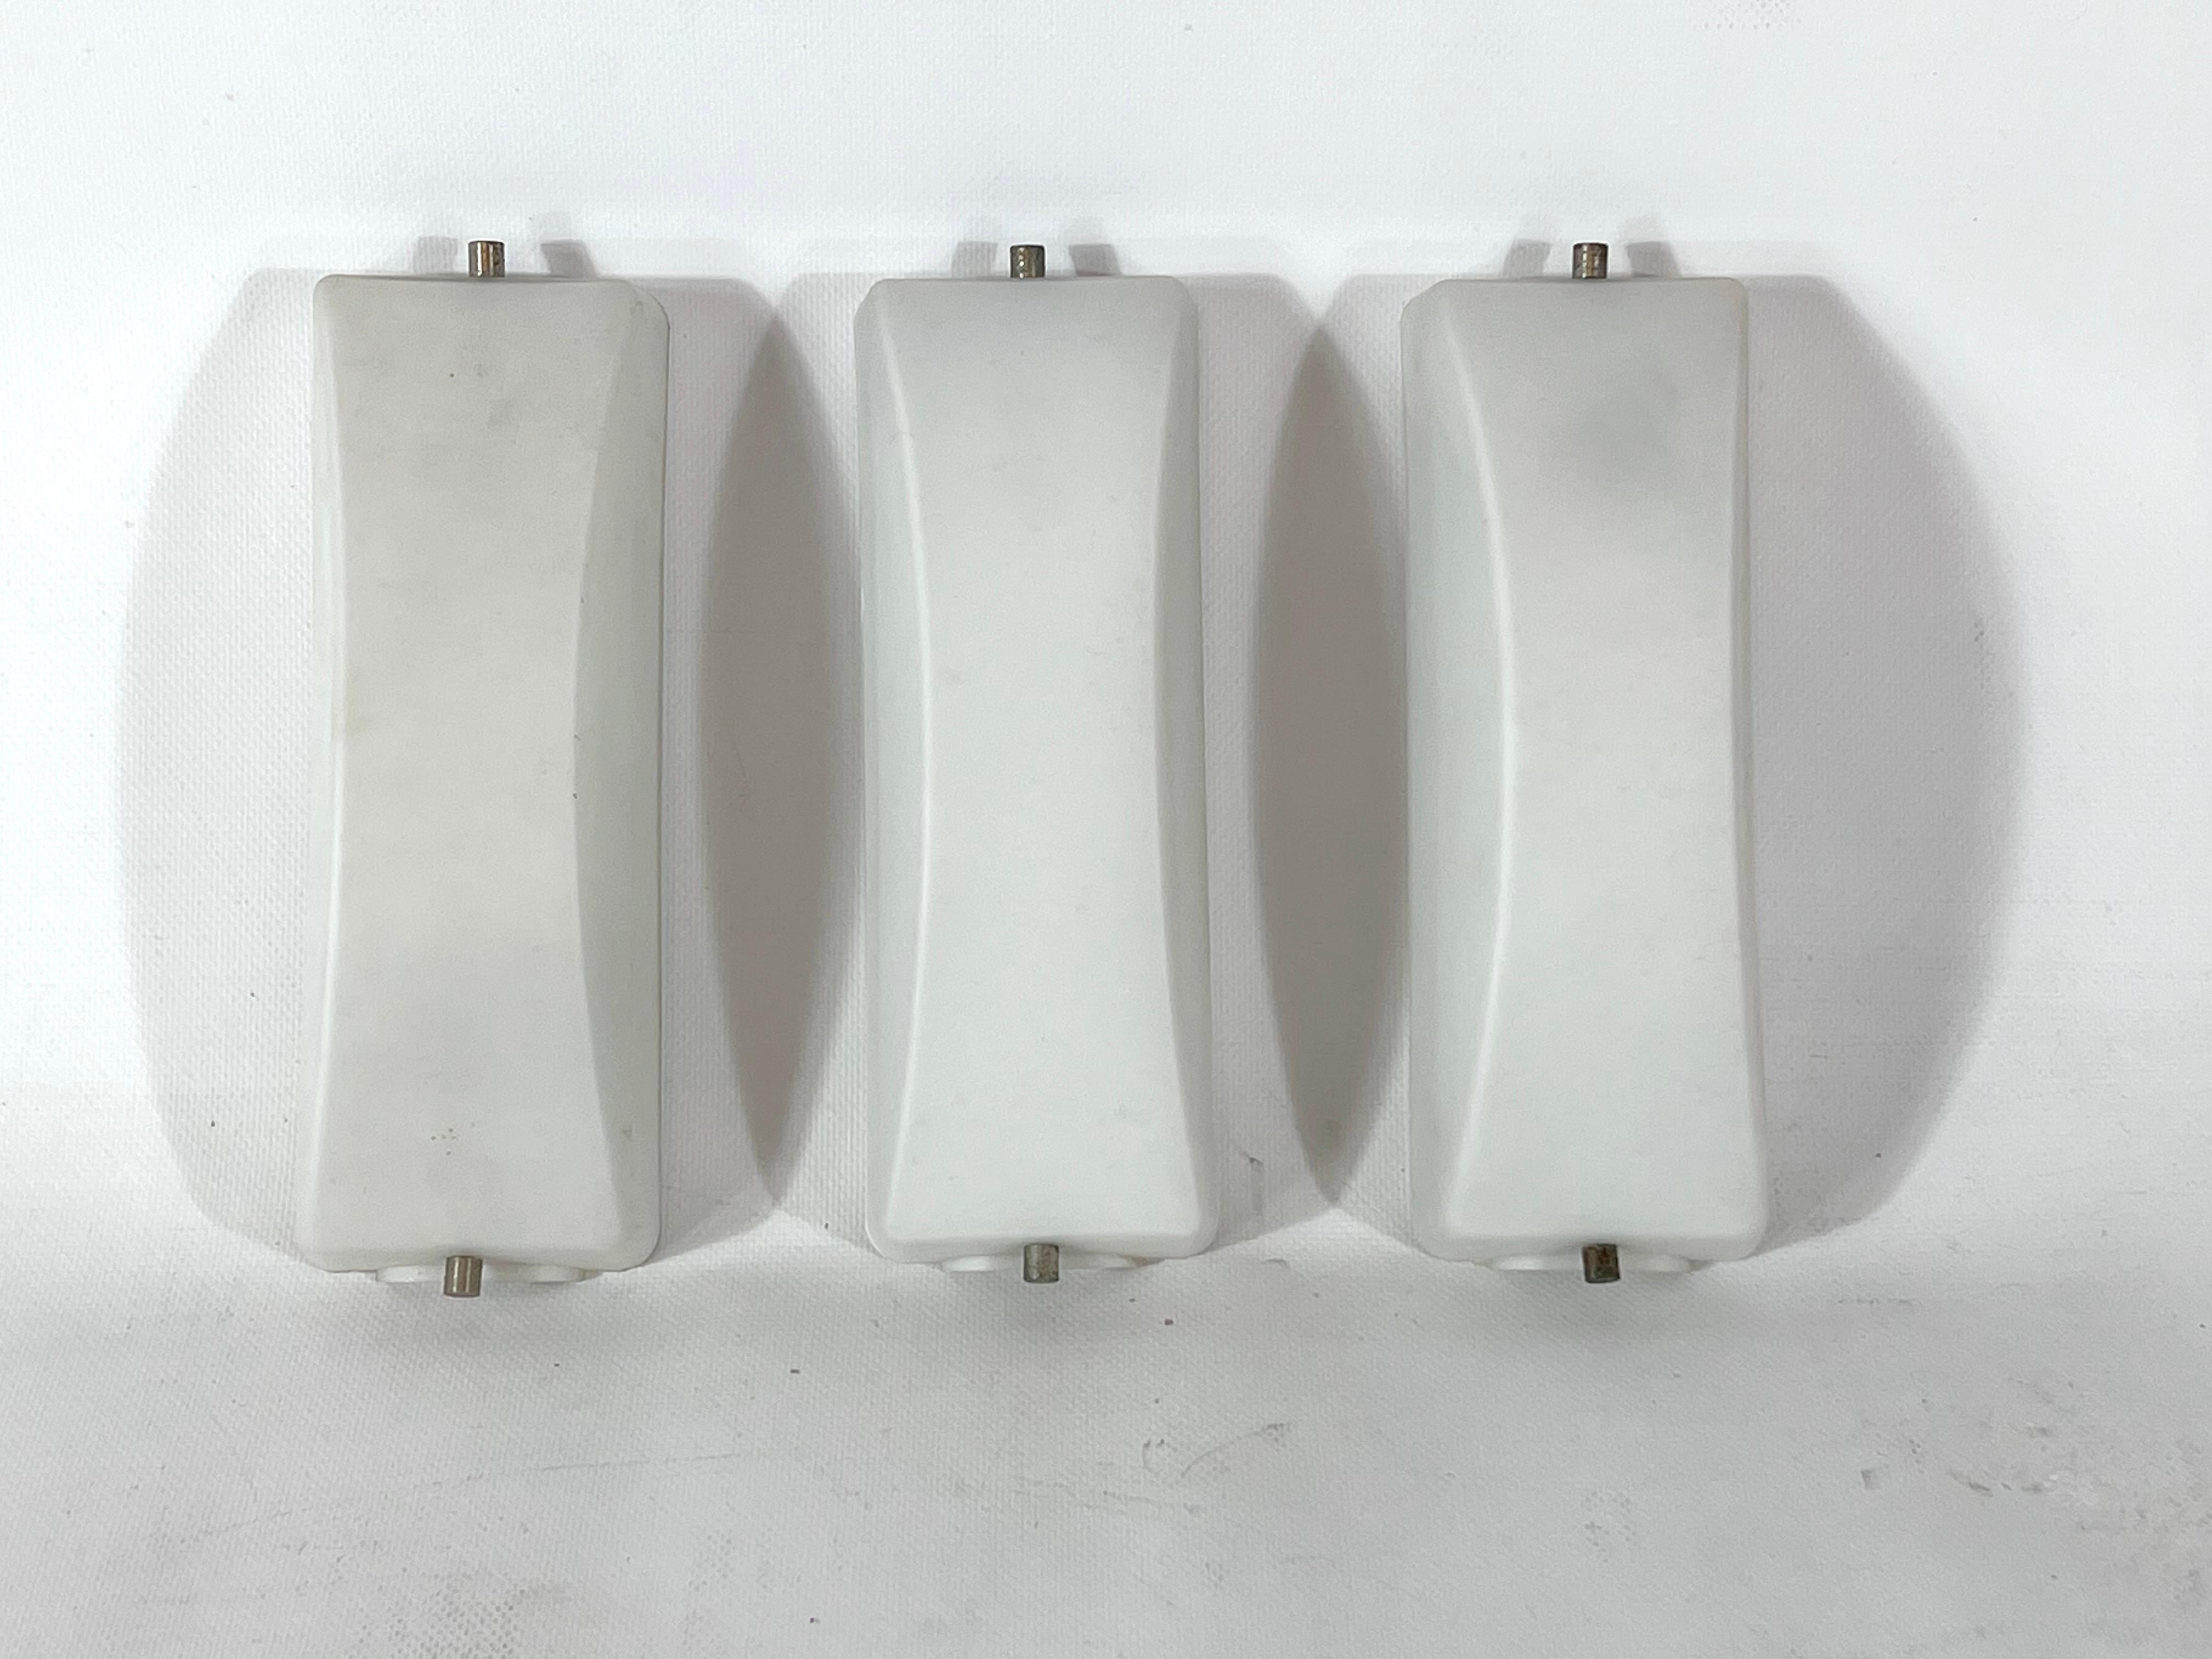 Good vintage condition with no chips or cracks for this set of three midcentury Italian sconces made from triplex opaline glass. Each sconce mounts a socket for E14 bulb. Full working with EU standard, adaptable on demand for USA standard.